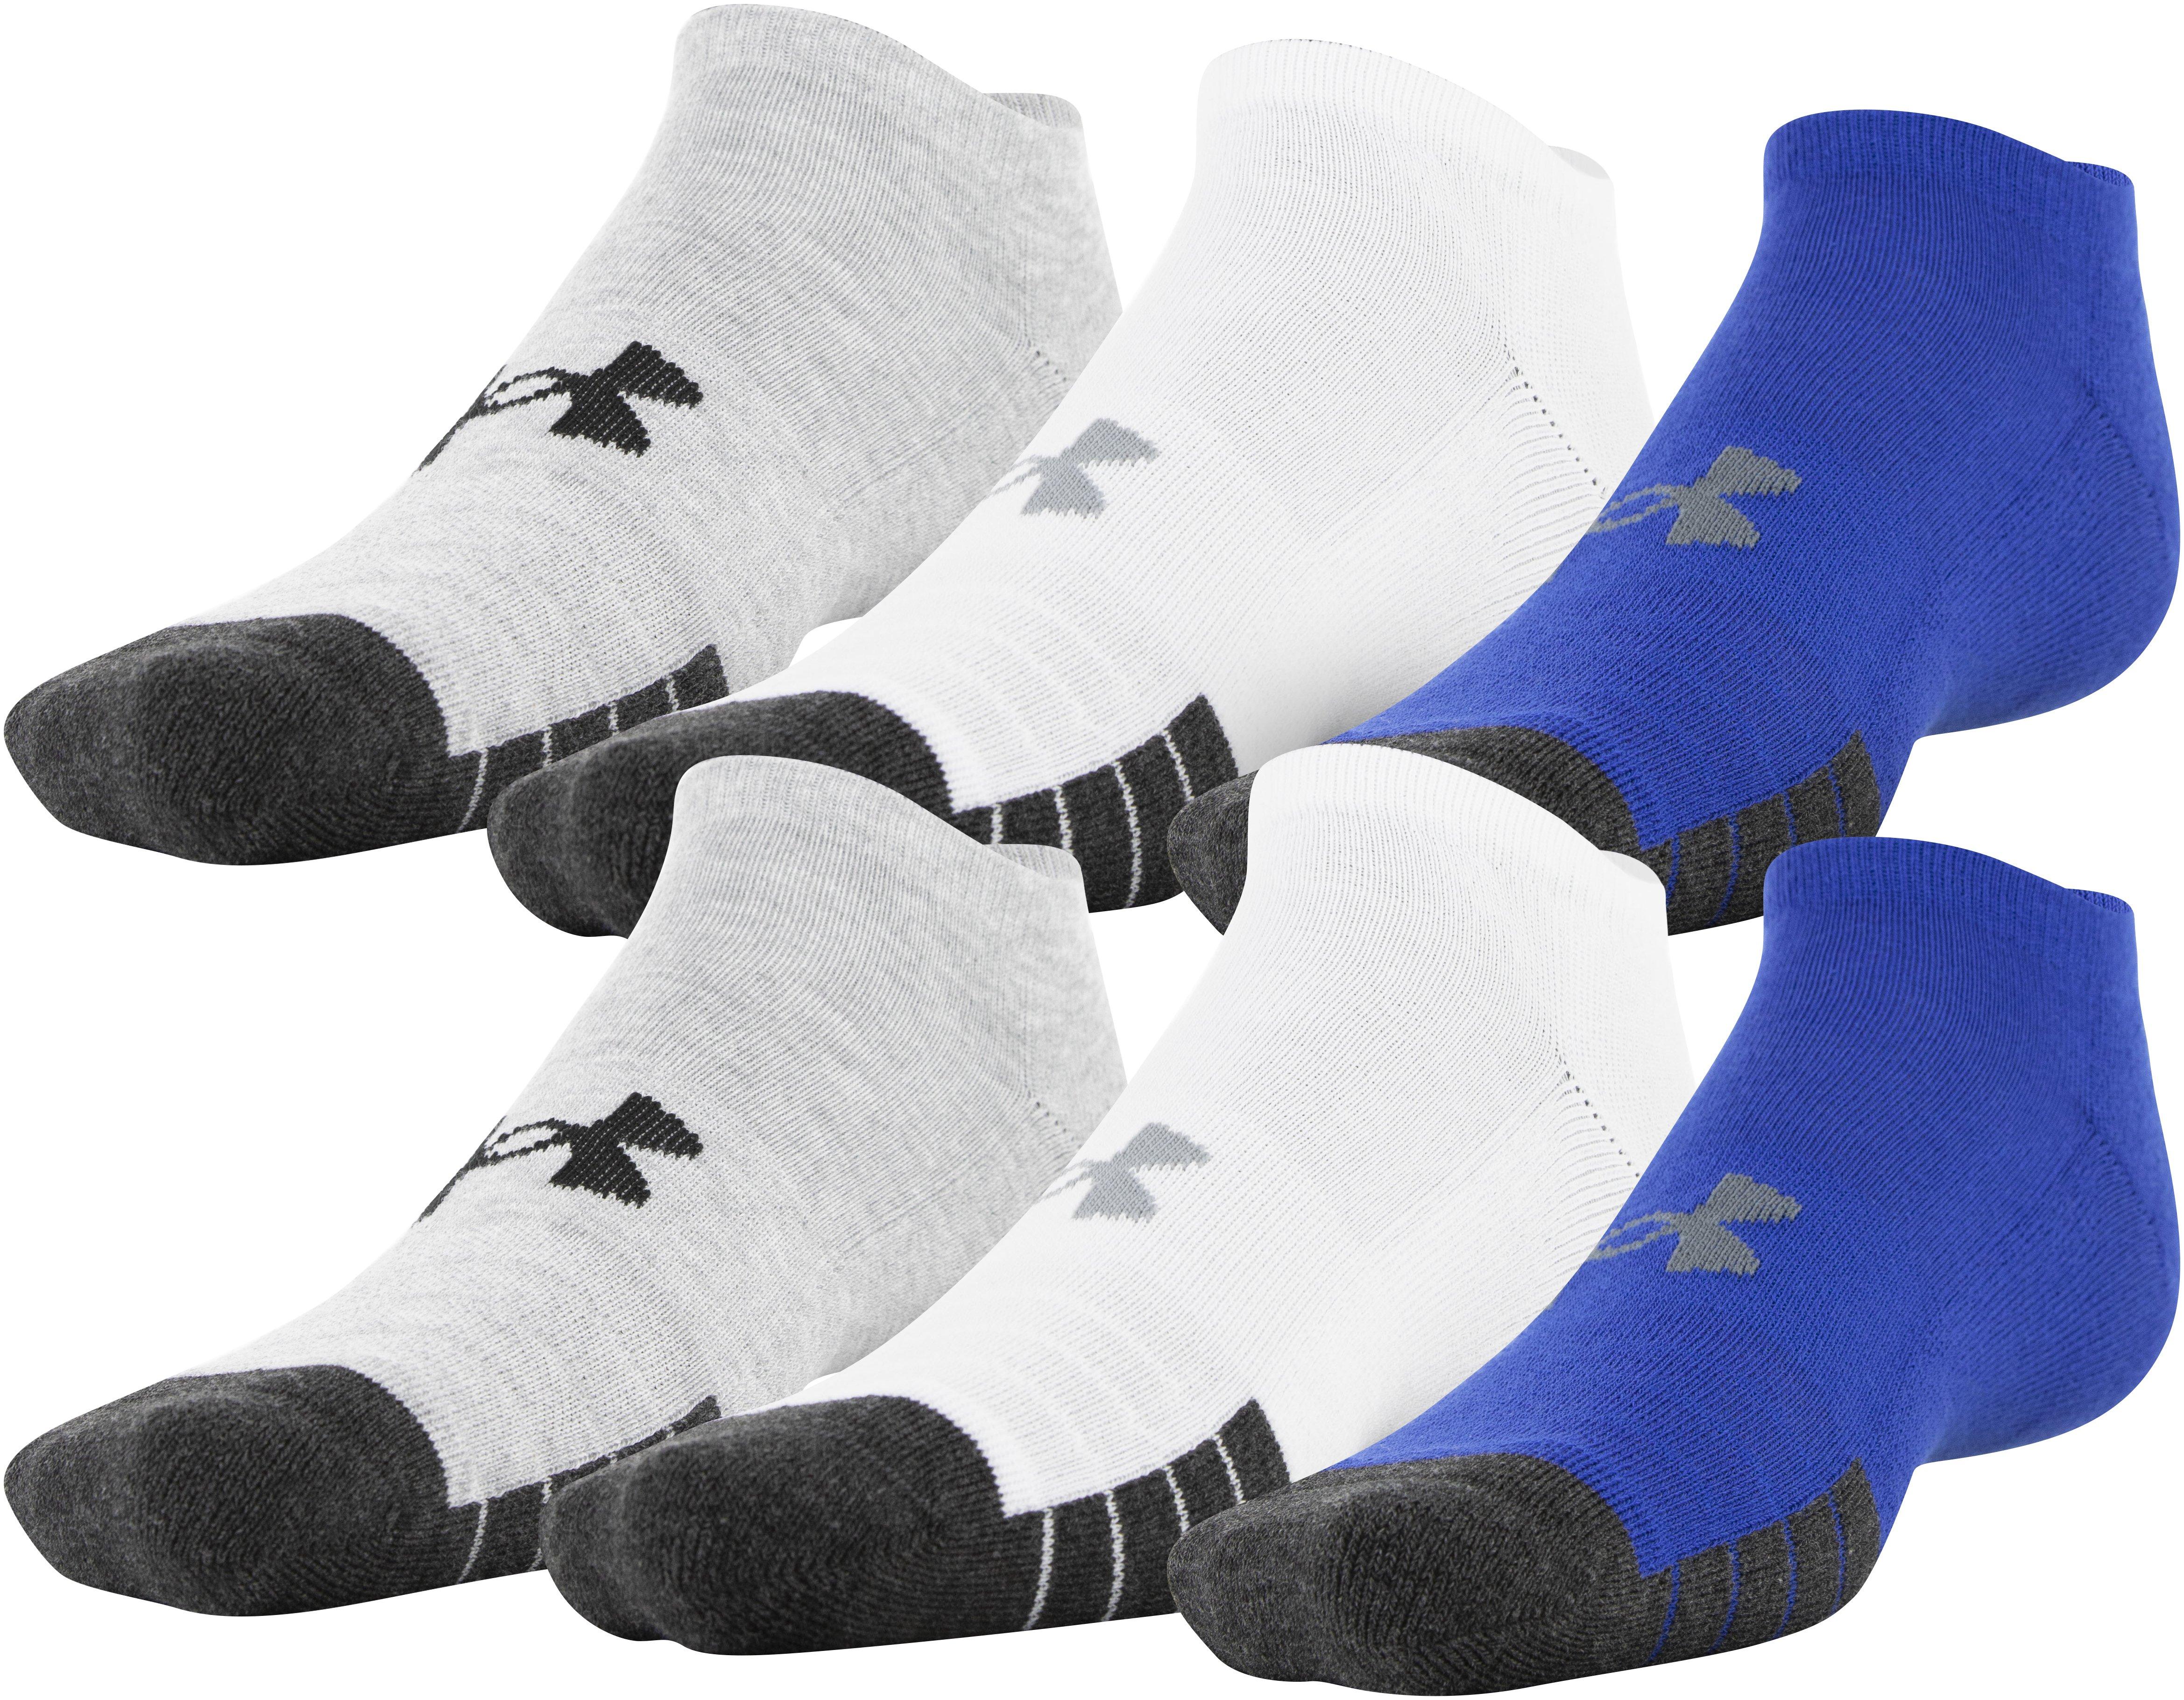 Under Armour Adult Performance Tech No Show Socks | Lyst